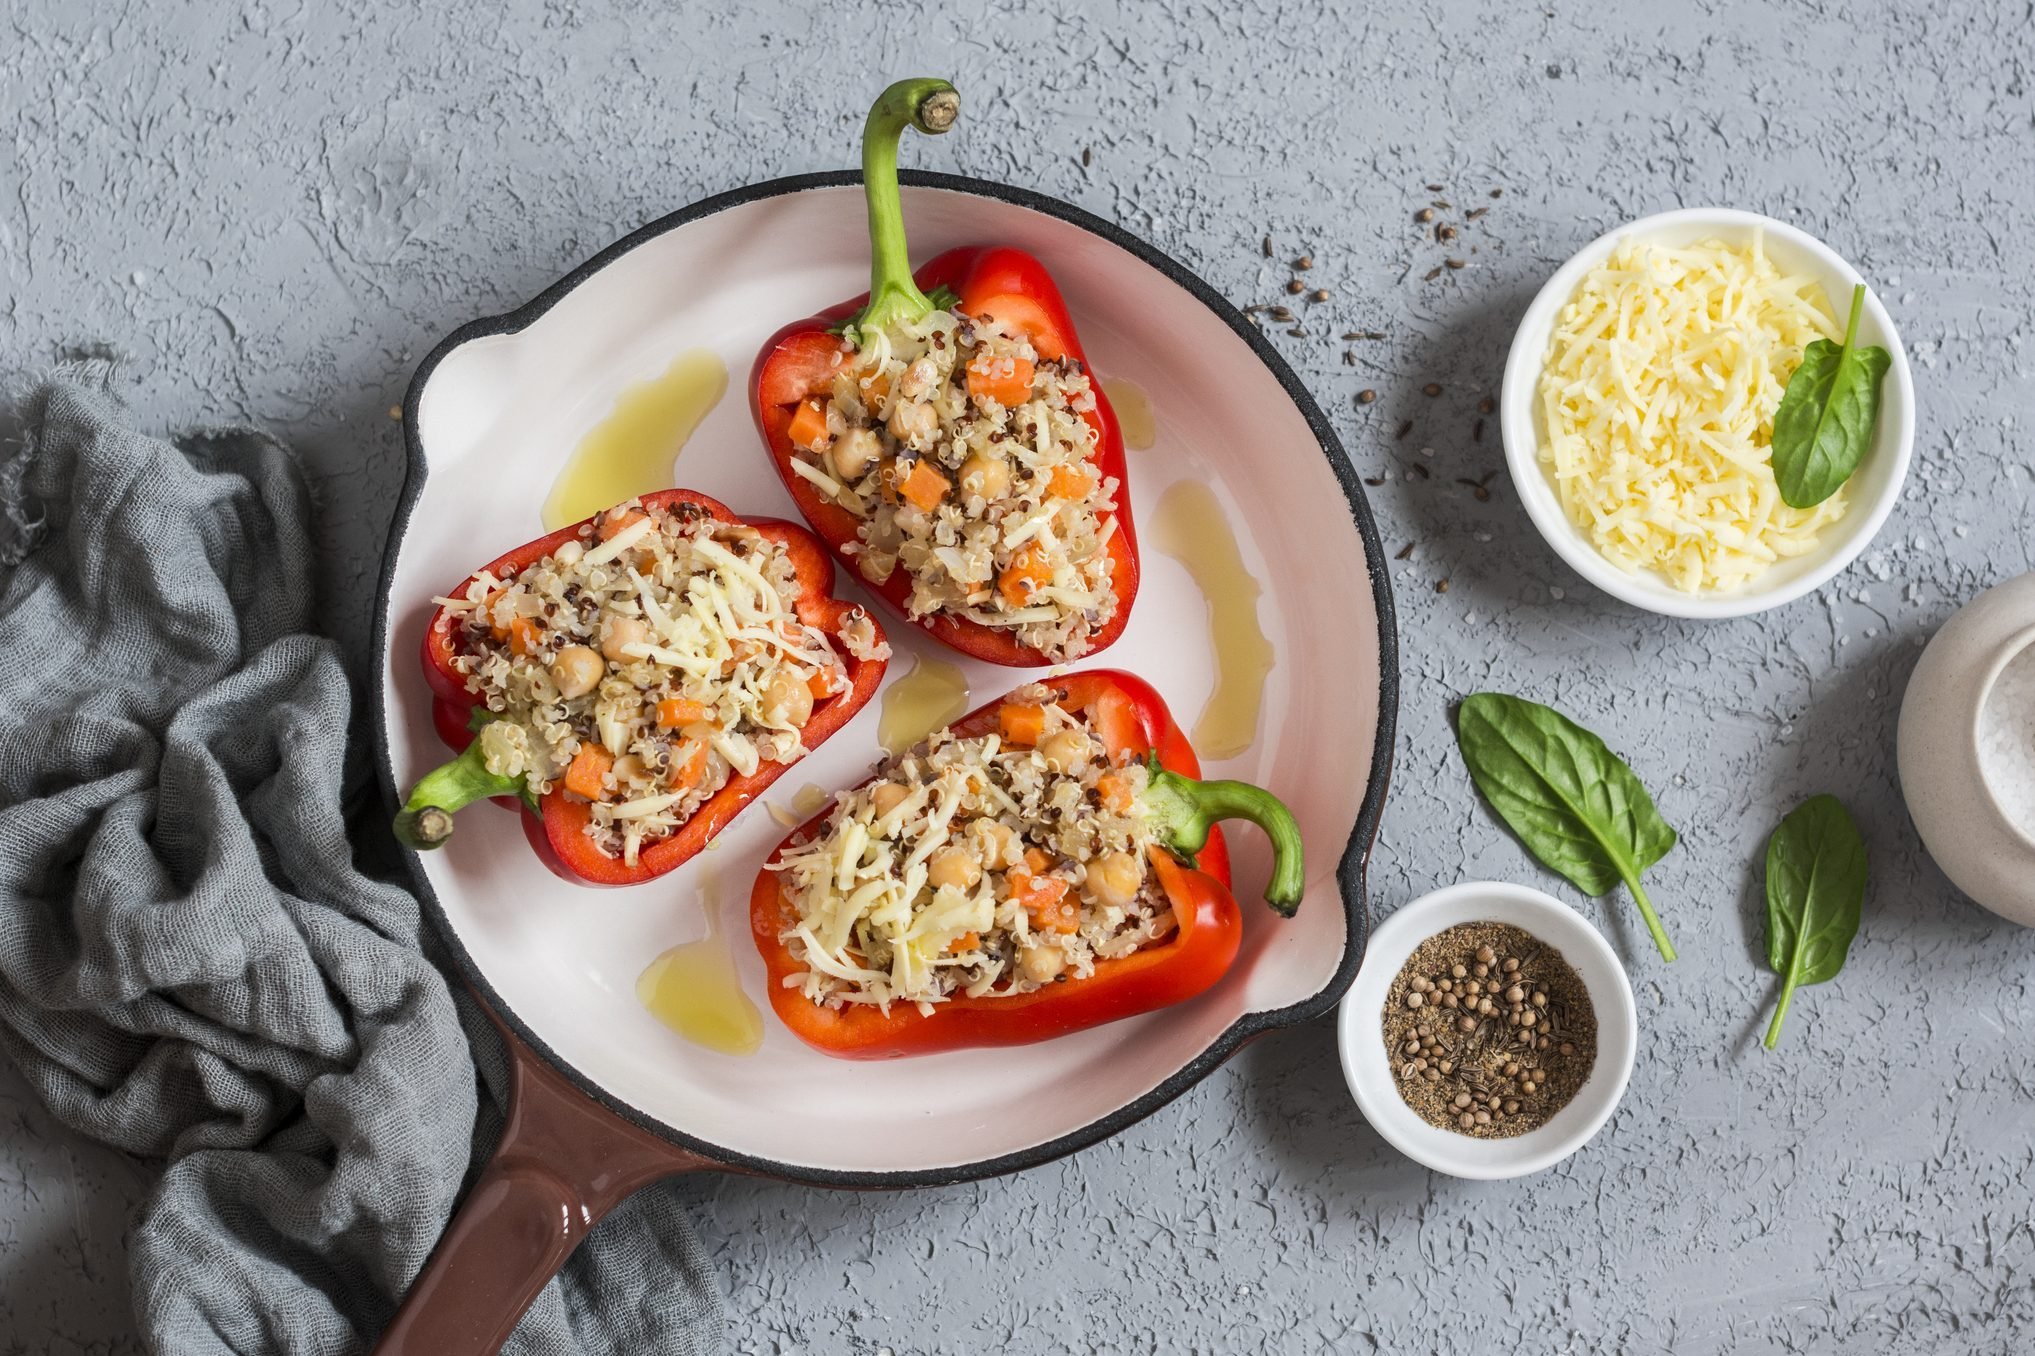 Raw quinoa stuffed sweet peppers in a cast iron skillet. Top view. Healthy, vegetarian food concept